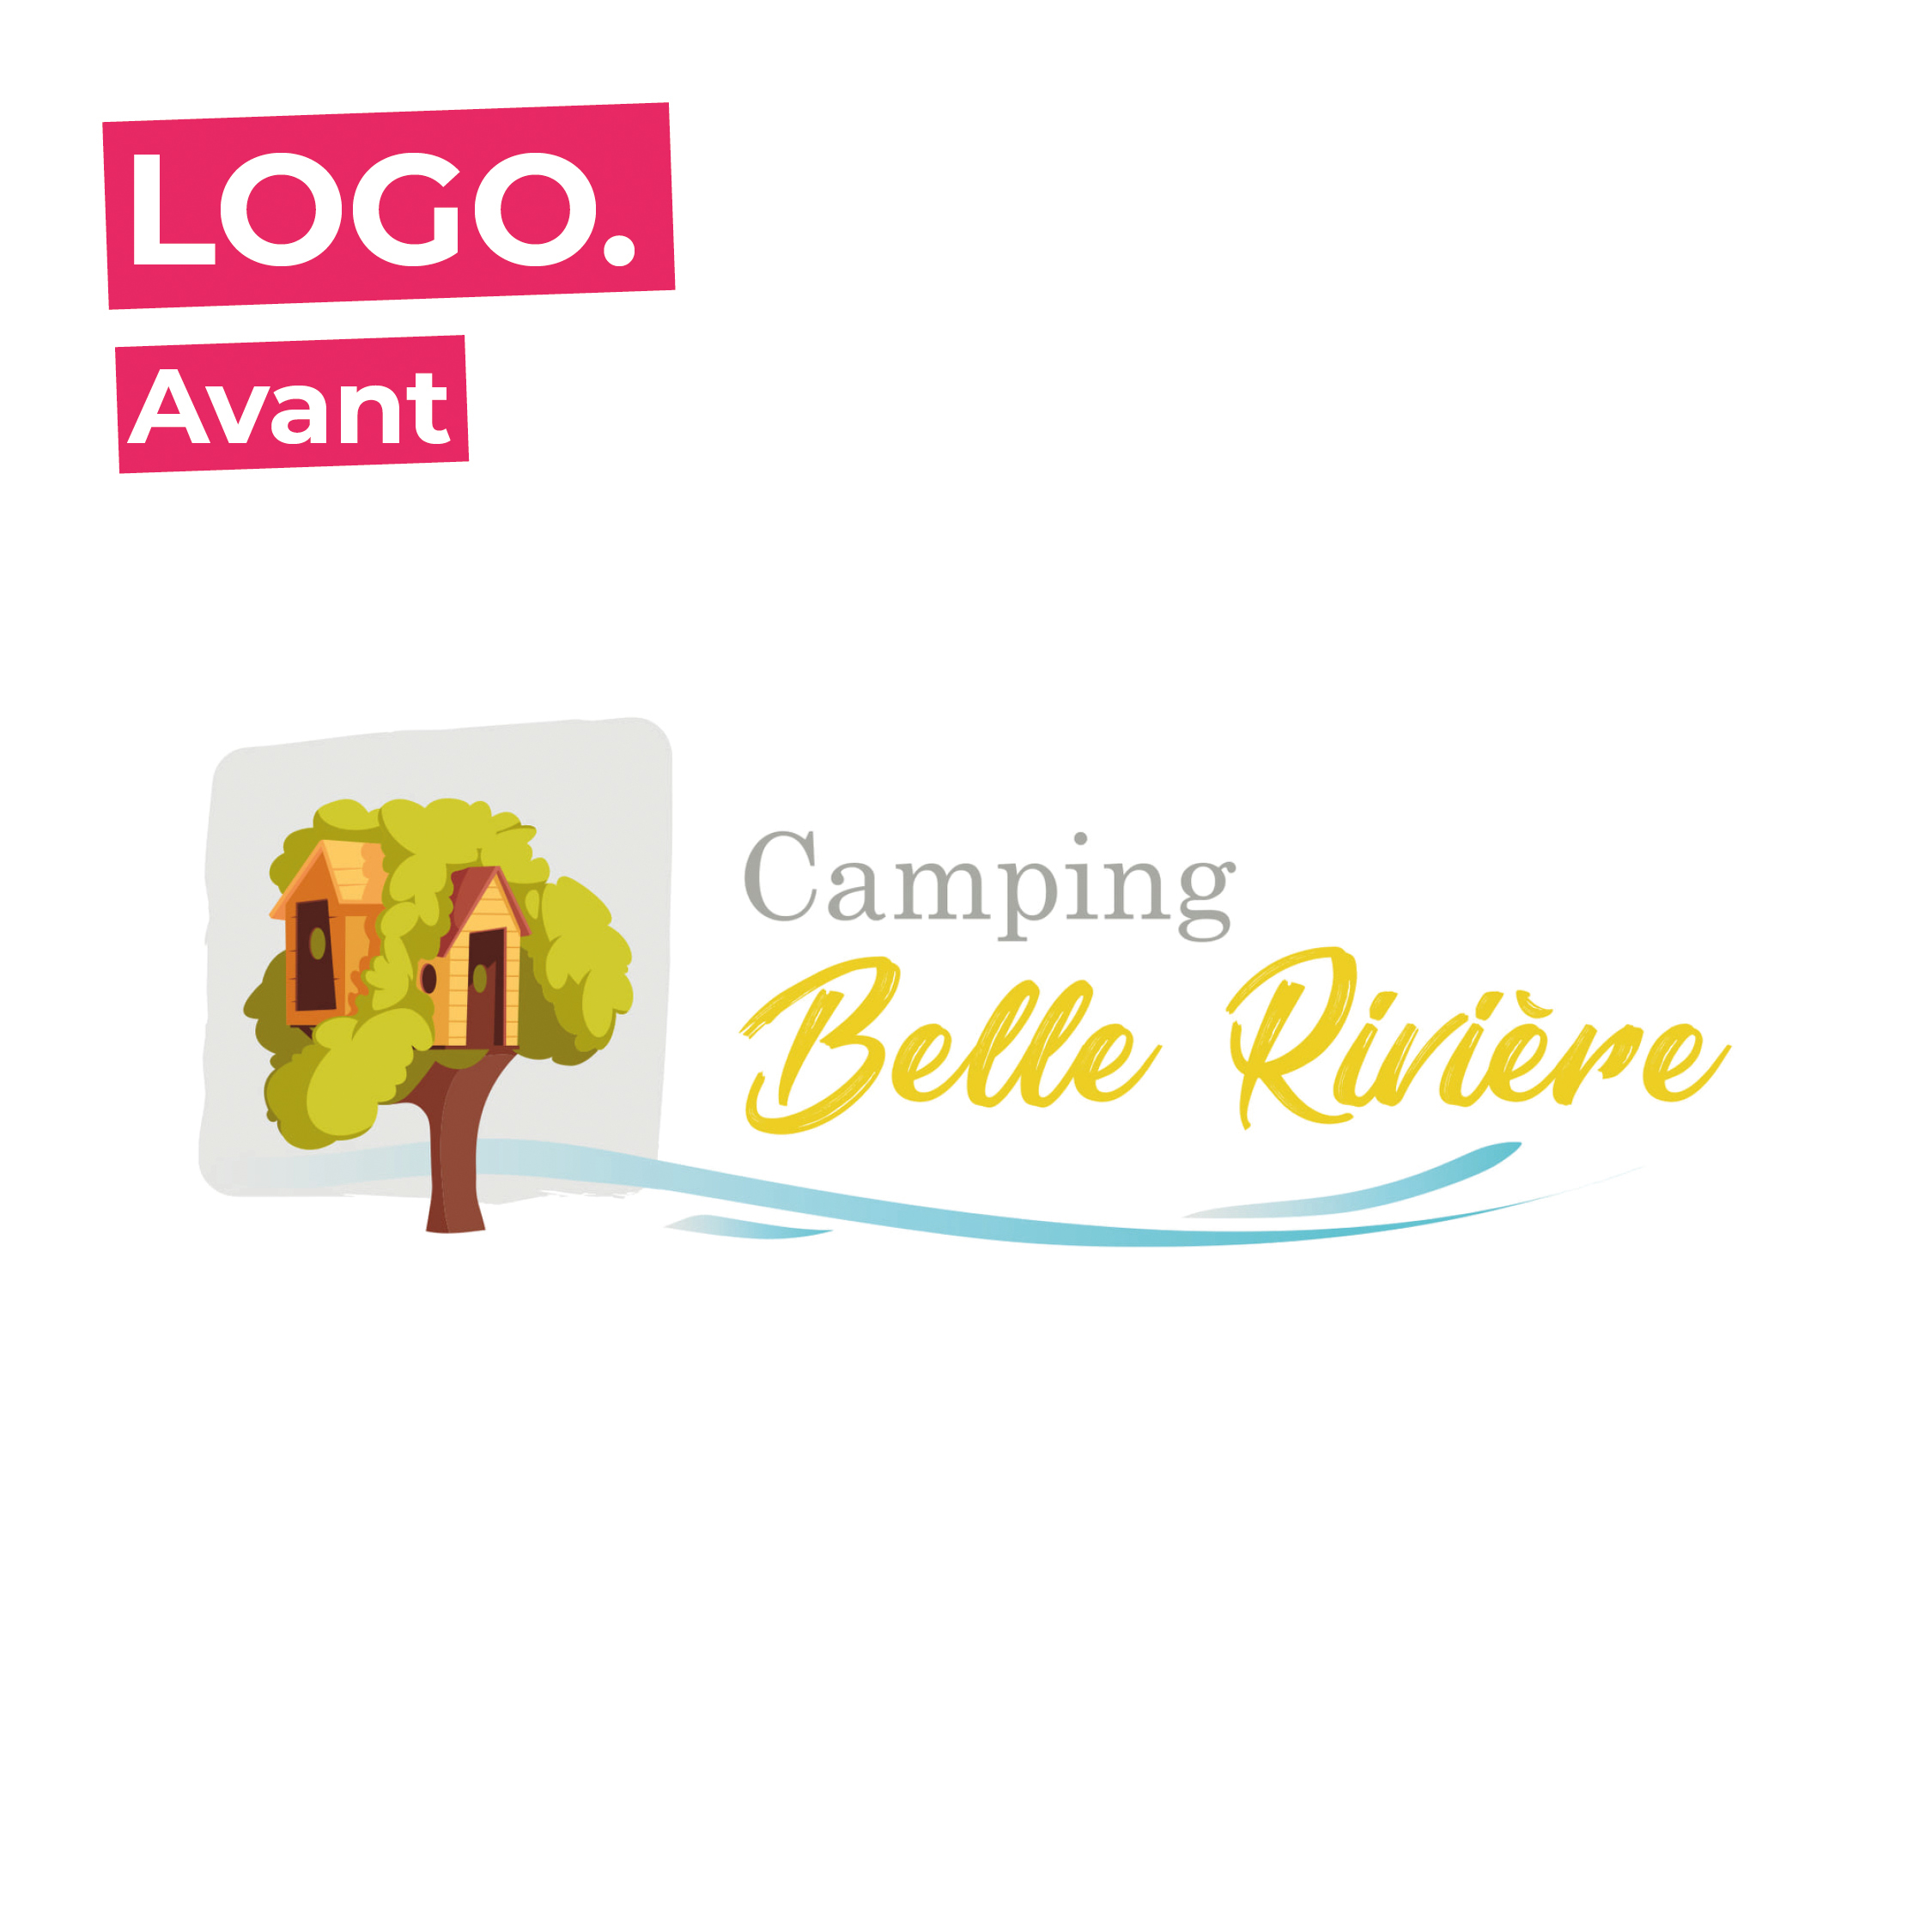 presentation-camping-chaniers-belle-riviere-logo-charente-maritime